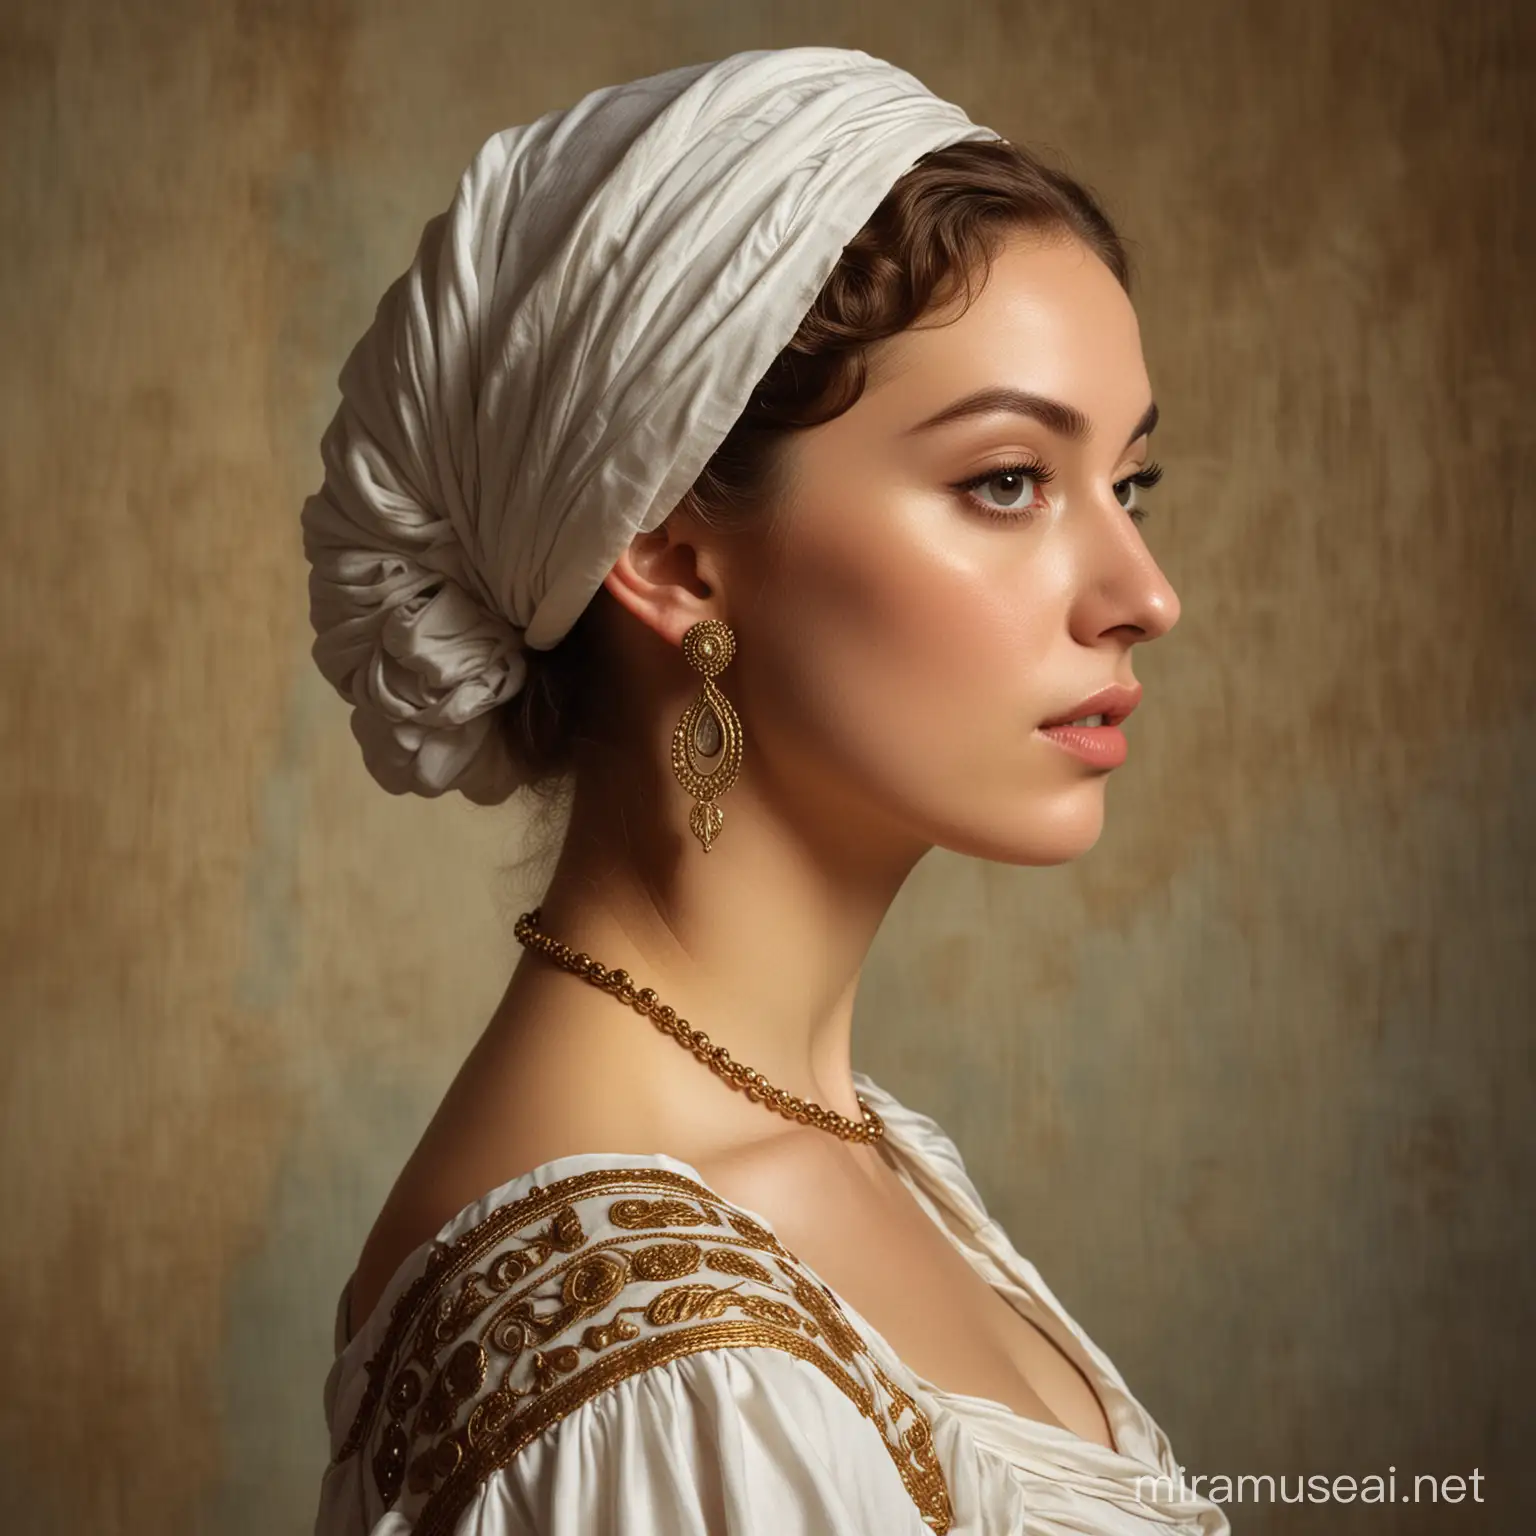 Portrait of Beautiful Young Woman in Ancient Greek Dress Inspired by Jean Dominique Ingres